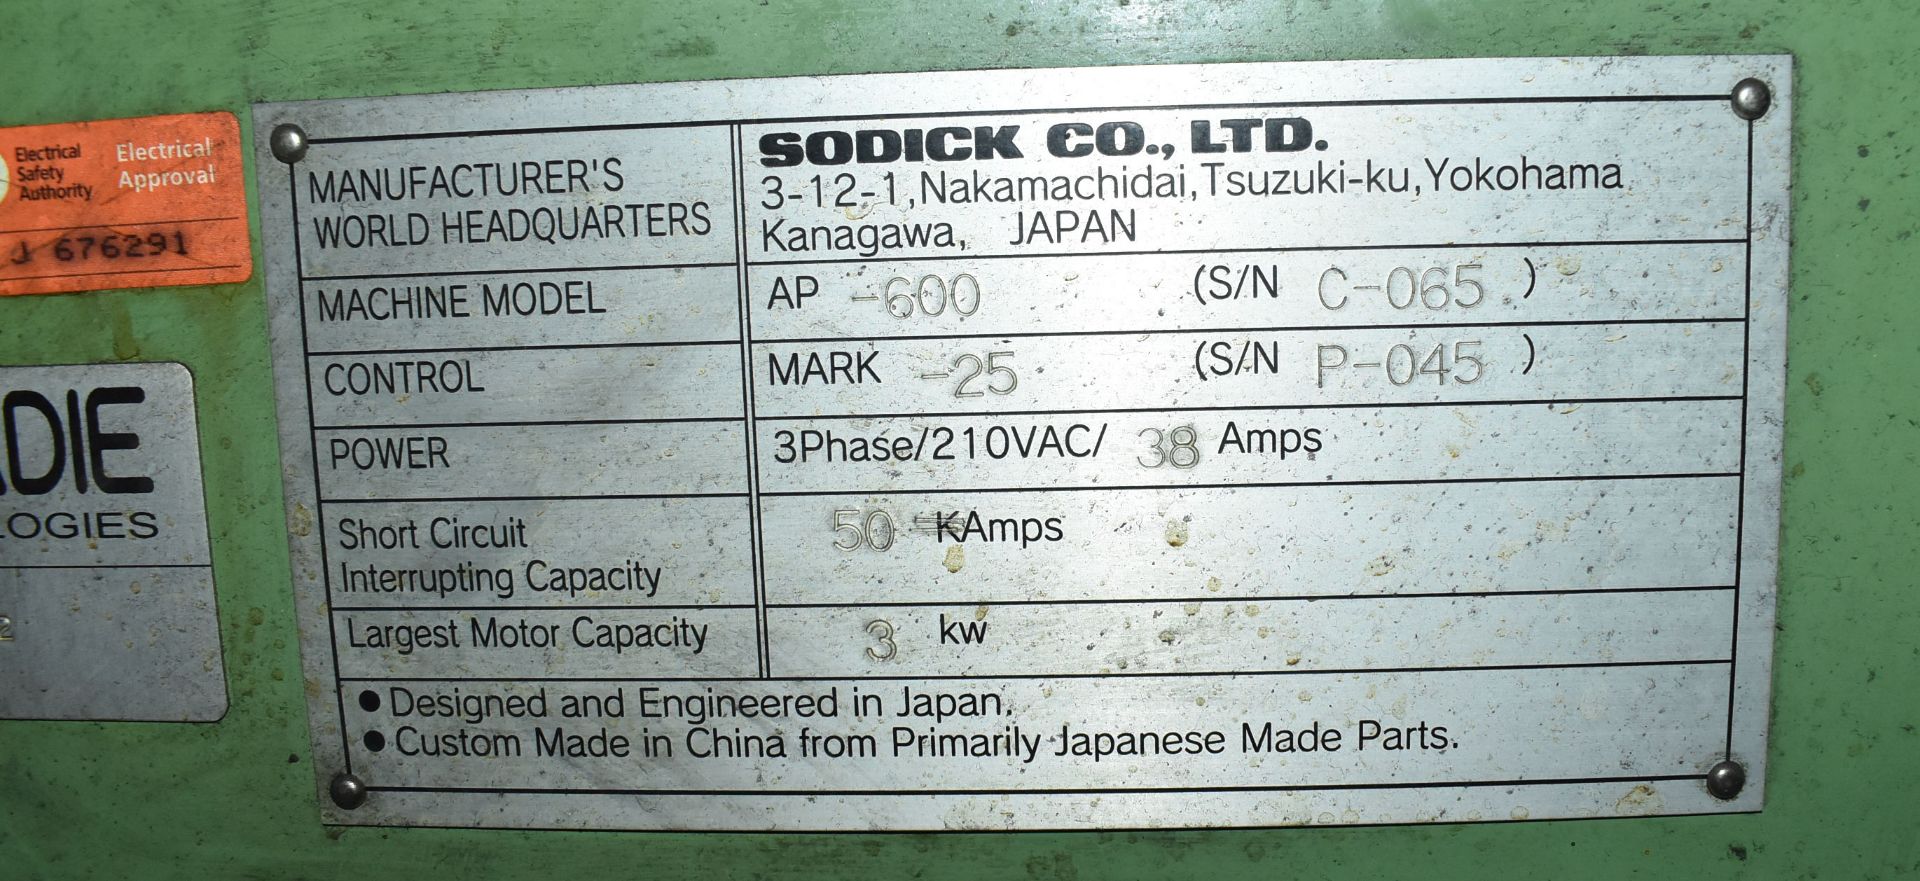 SODICK AP600 CNC WIRE EDM WITH SODICK MARK 25 CNC CONTROL WITH TRAVELS; X- 23.6", Y- 15.7", Z-7. - Image 11 of 11